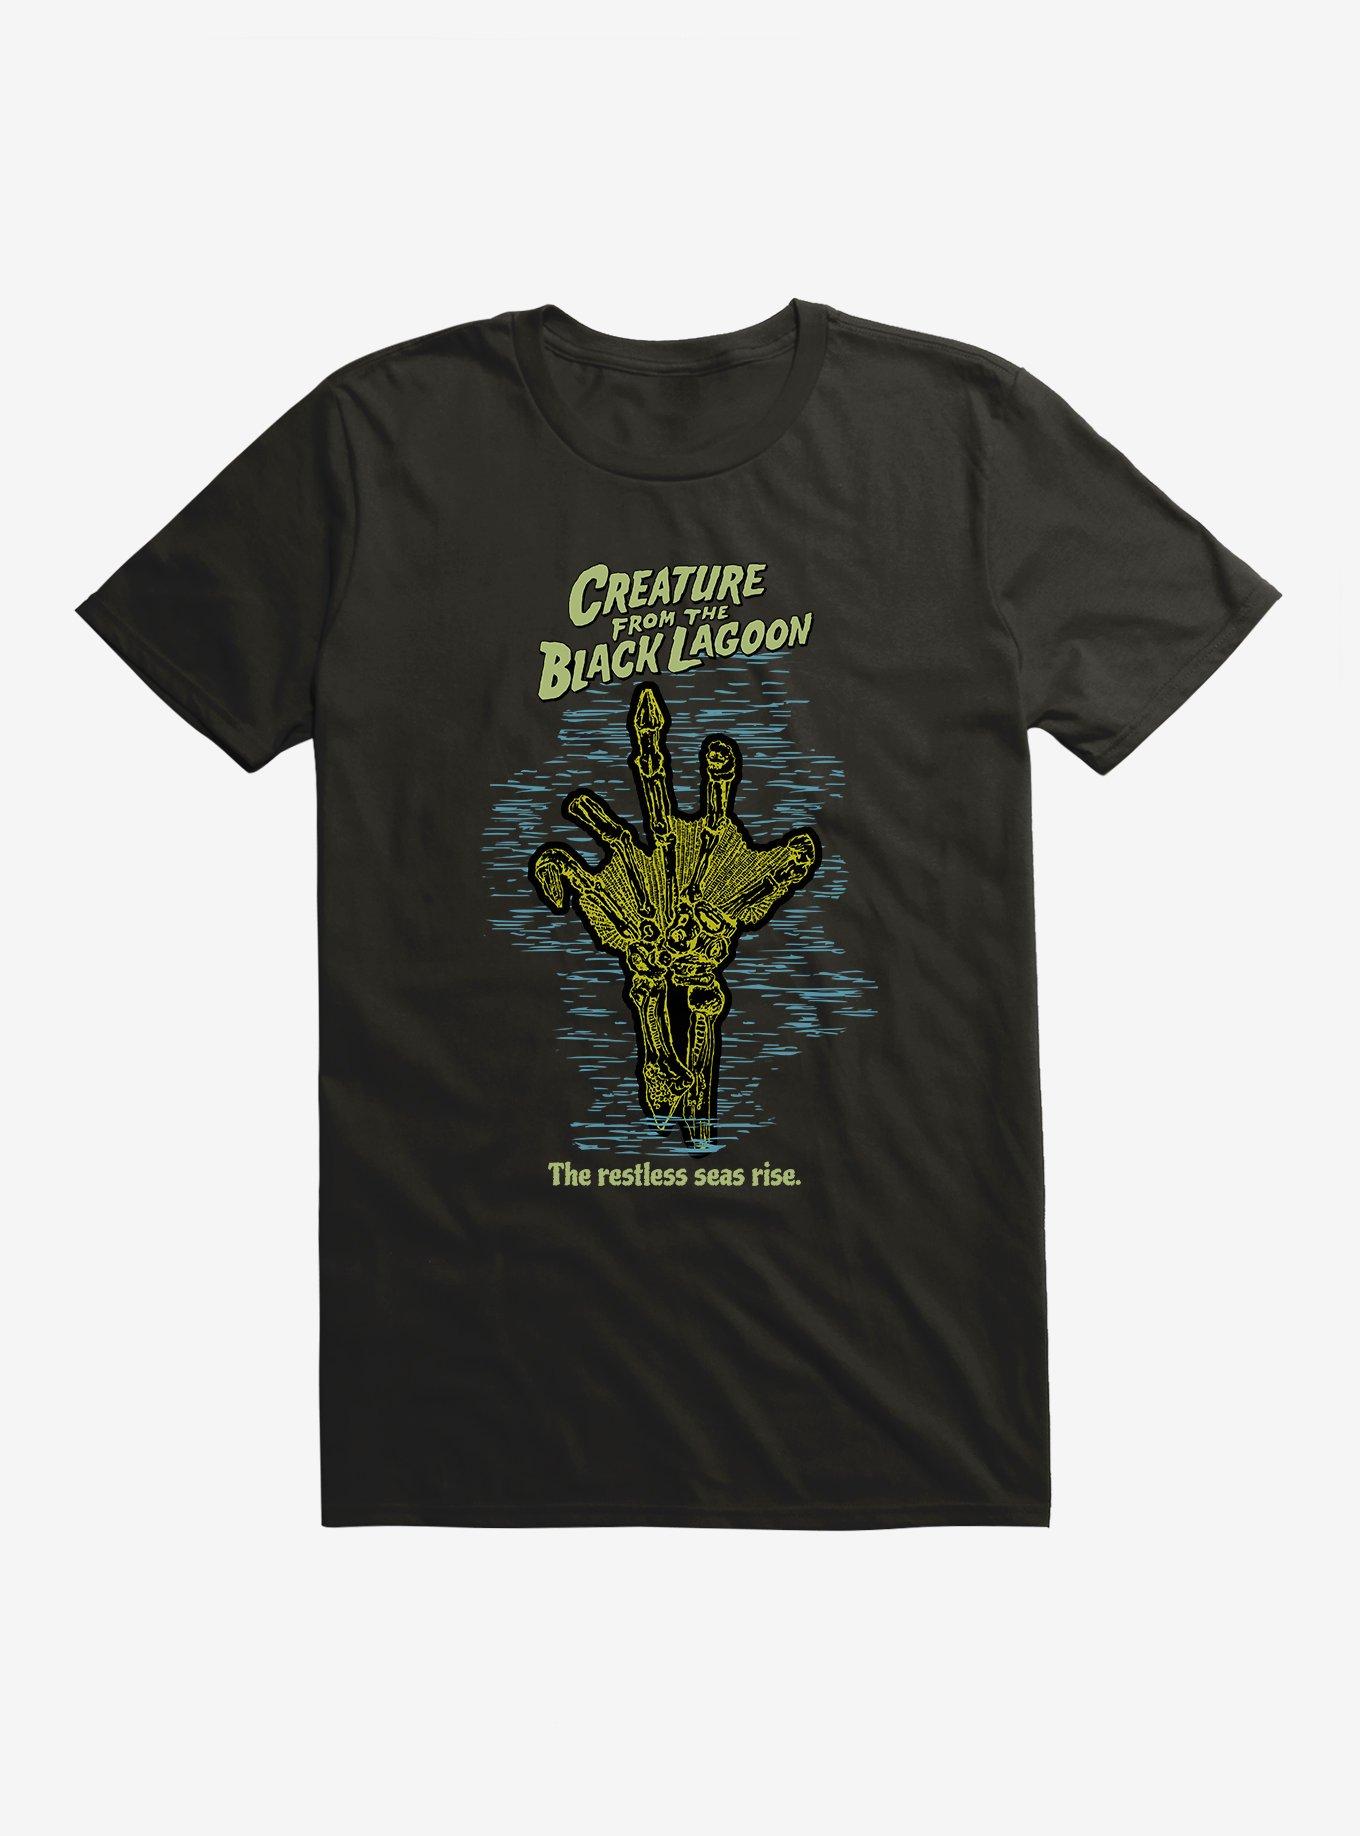 Creature From The Black Lagoon Restless Seas Rise T-Shirt